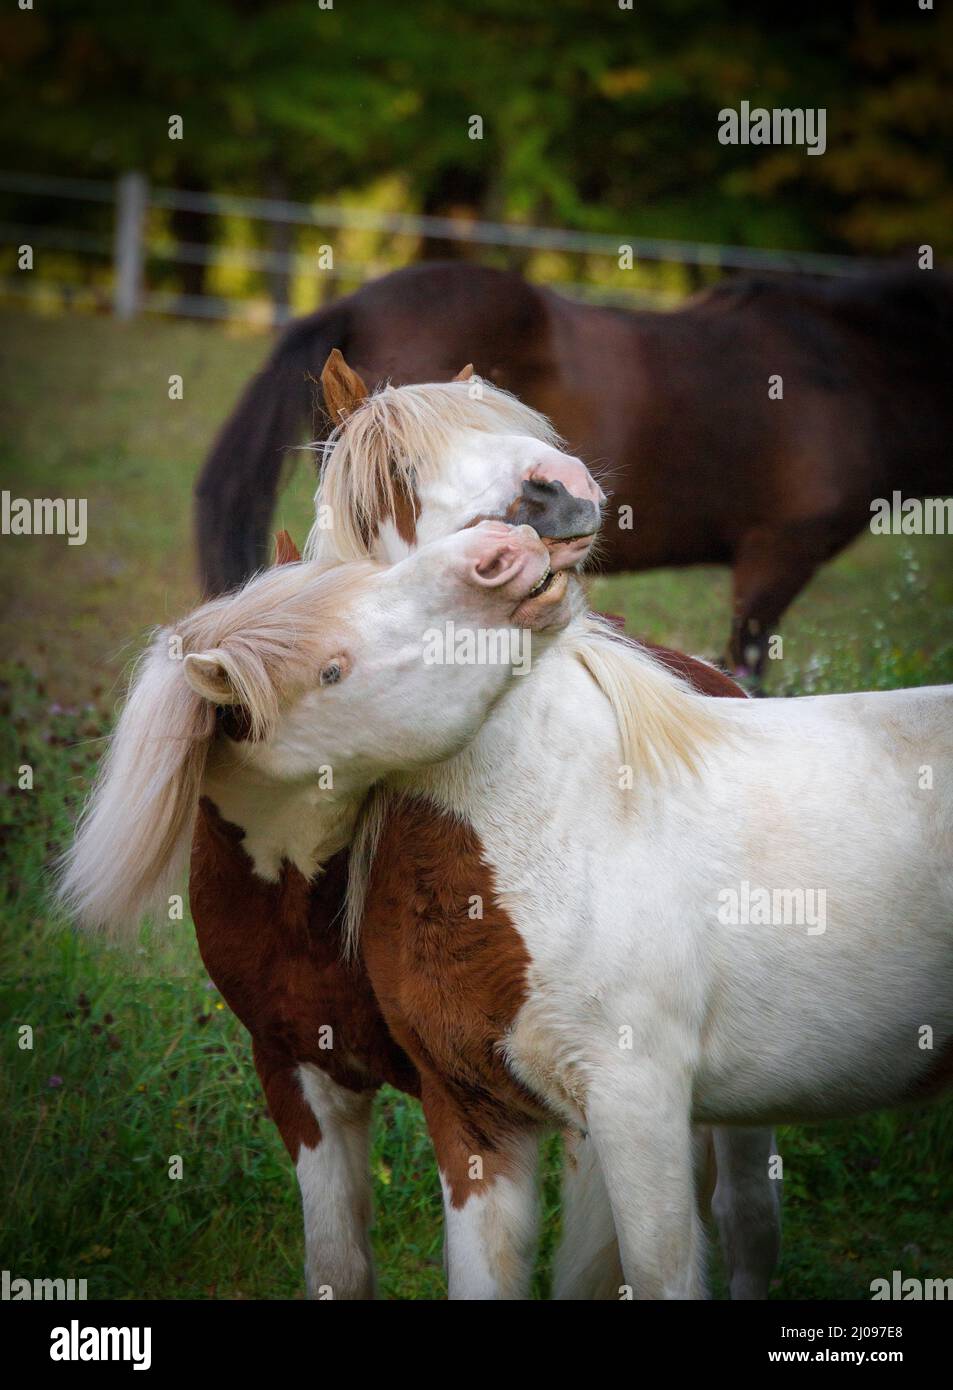 An Iceland horse stallion gives a love bite to a mare Stock Photo